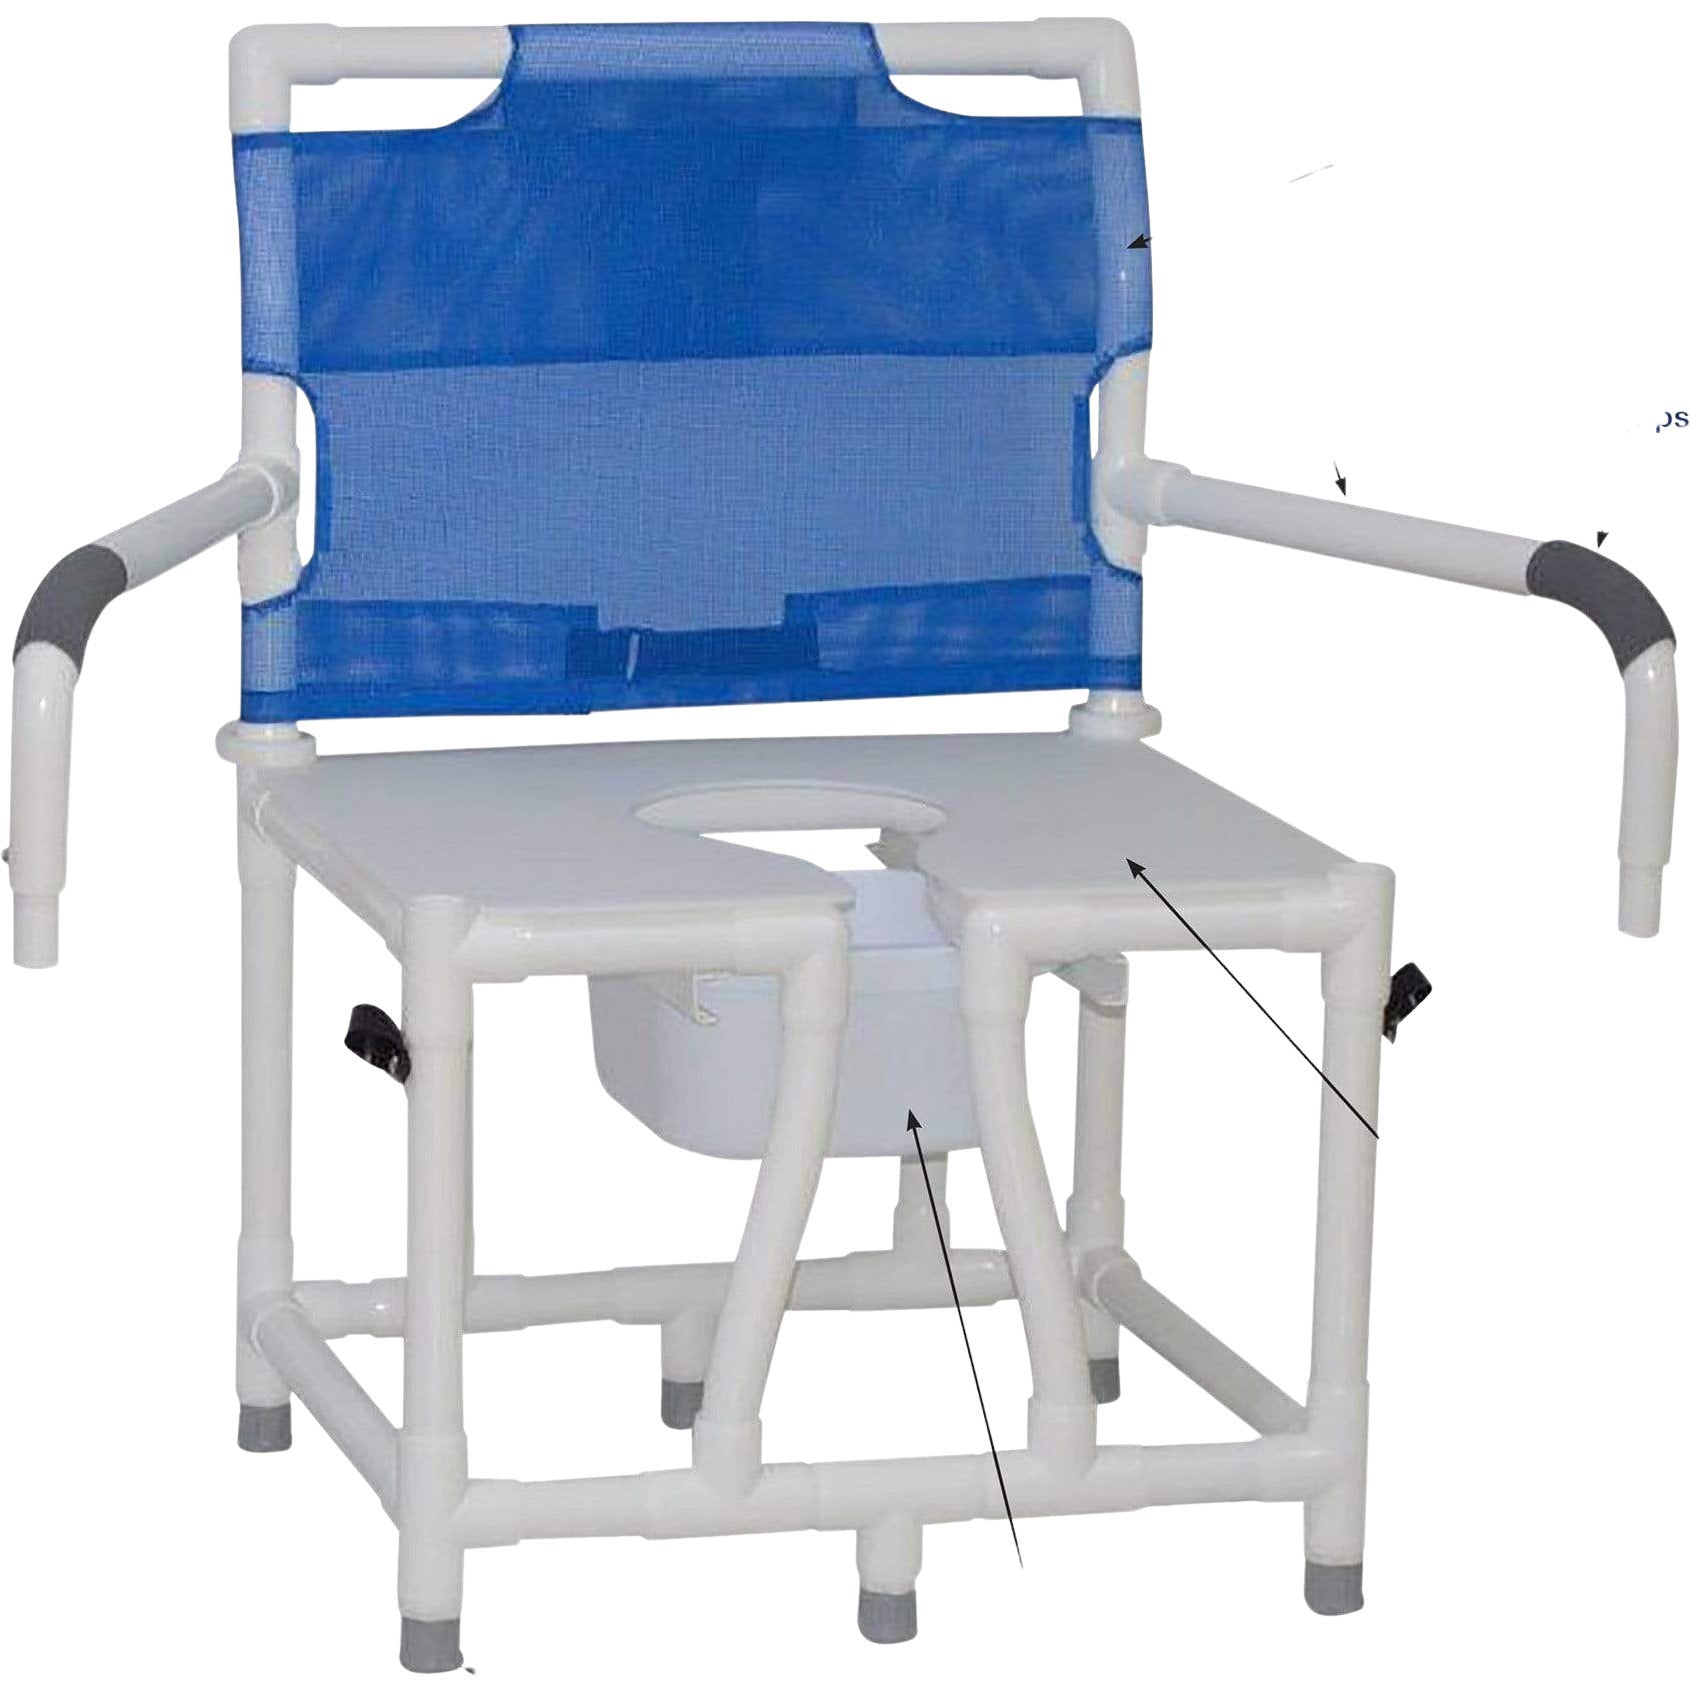 ConvaQuip Bedside Commodes - PVC Bariatric Bedside Commode - Swing Away Arms Model 124-C10-DDA by ConvaQuip